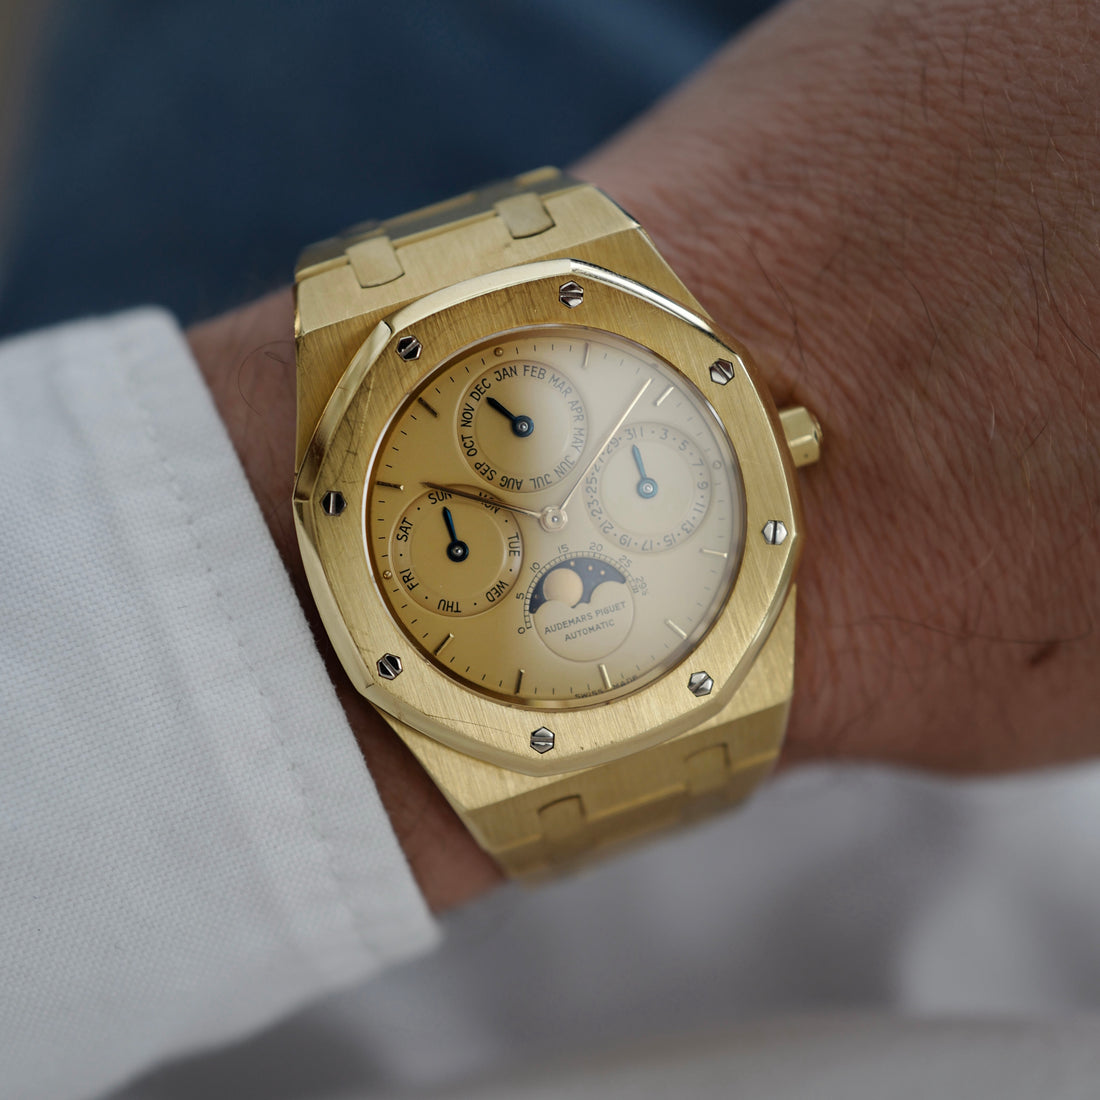 AUDEMARS PIGUET, ROYAL OAK QUANTIEME PERPETUEL AUTOMATIC REF 25654 A  STAINLESS STEEL AND YELLOW GOLD AUTOMATIC PERPETUAL CALENDAR WRISTWATCH  WITH MOON PHASES CIRCA 1990, Watches Online, Watches